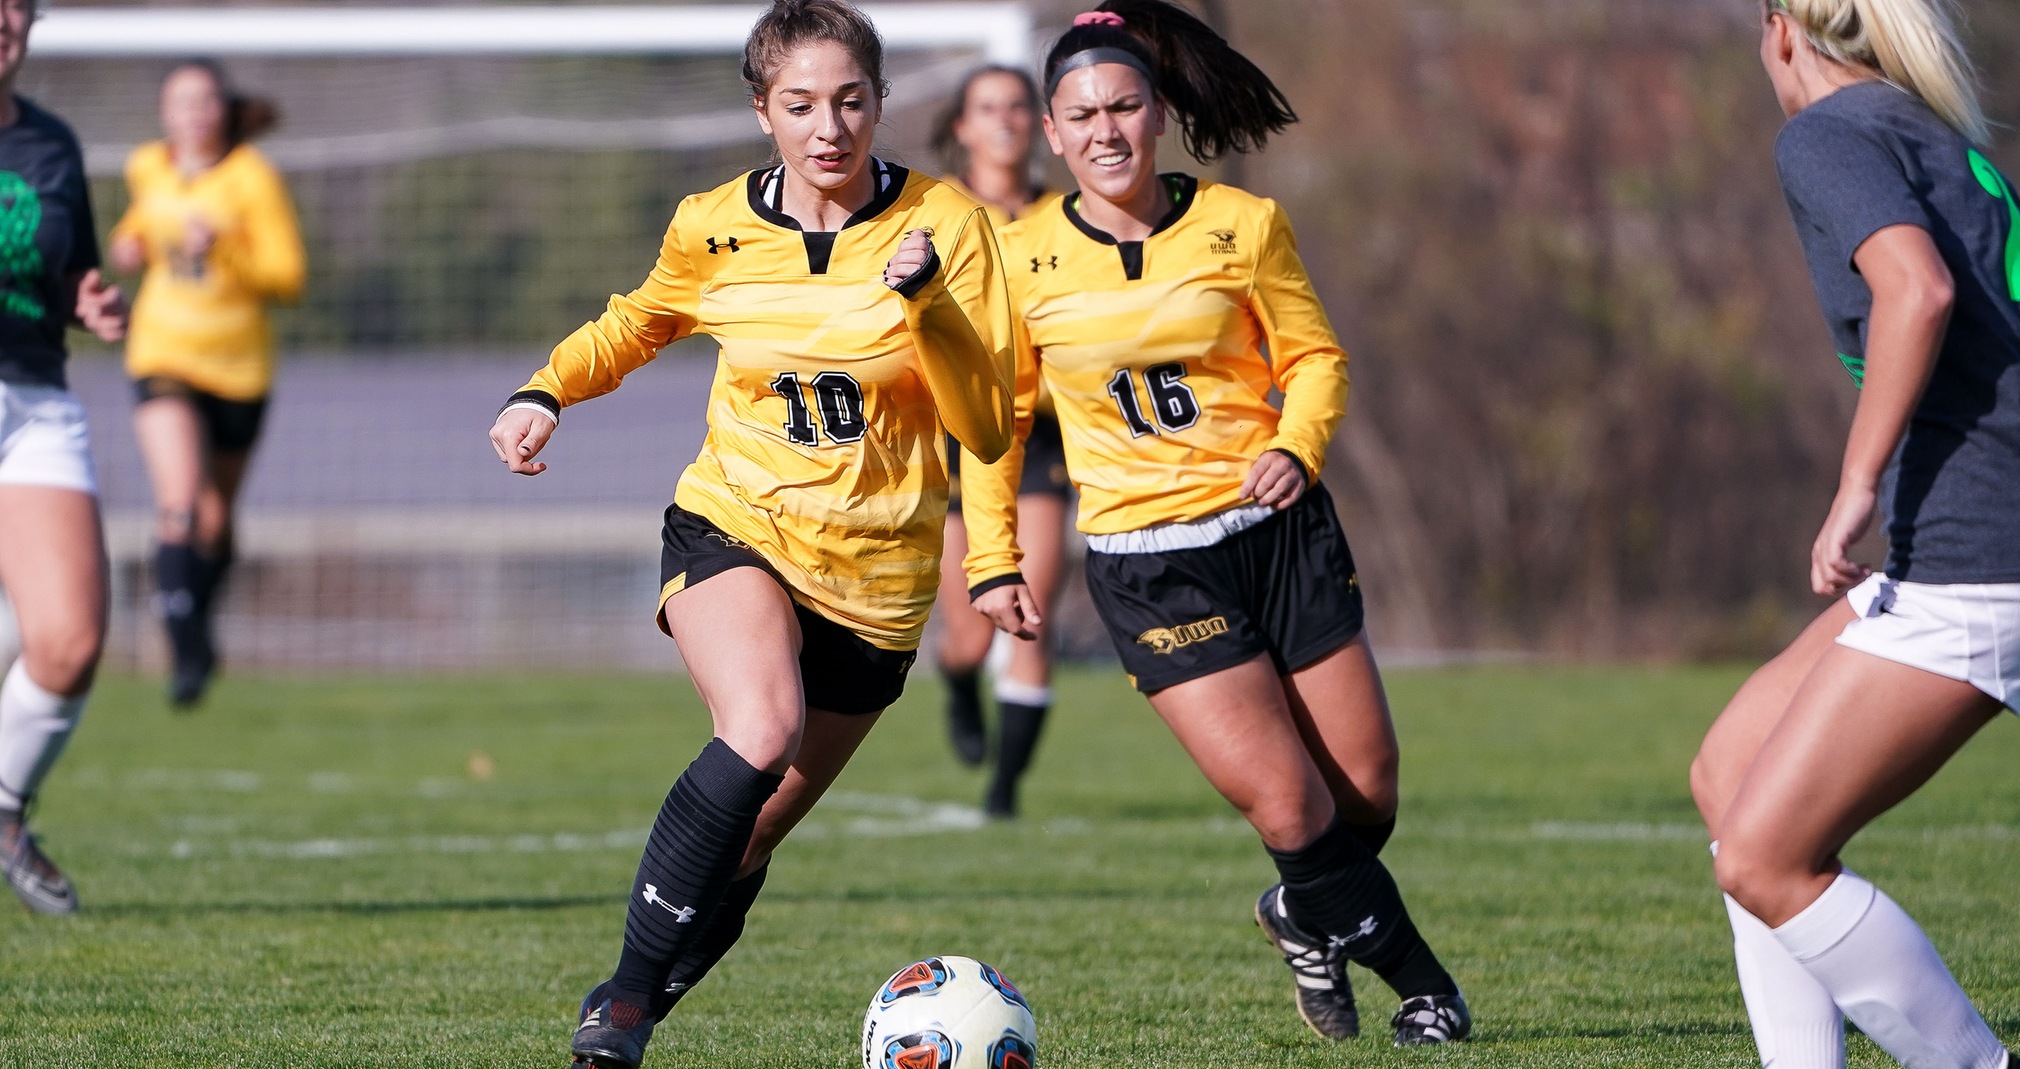 Alexia Poulos plays the ball upfield against the Falcons.